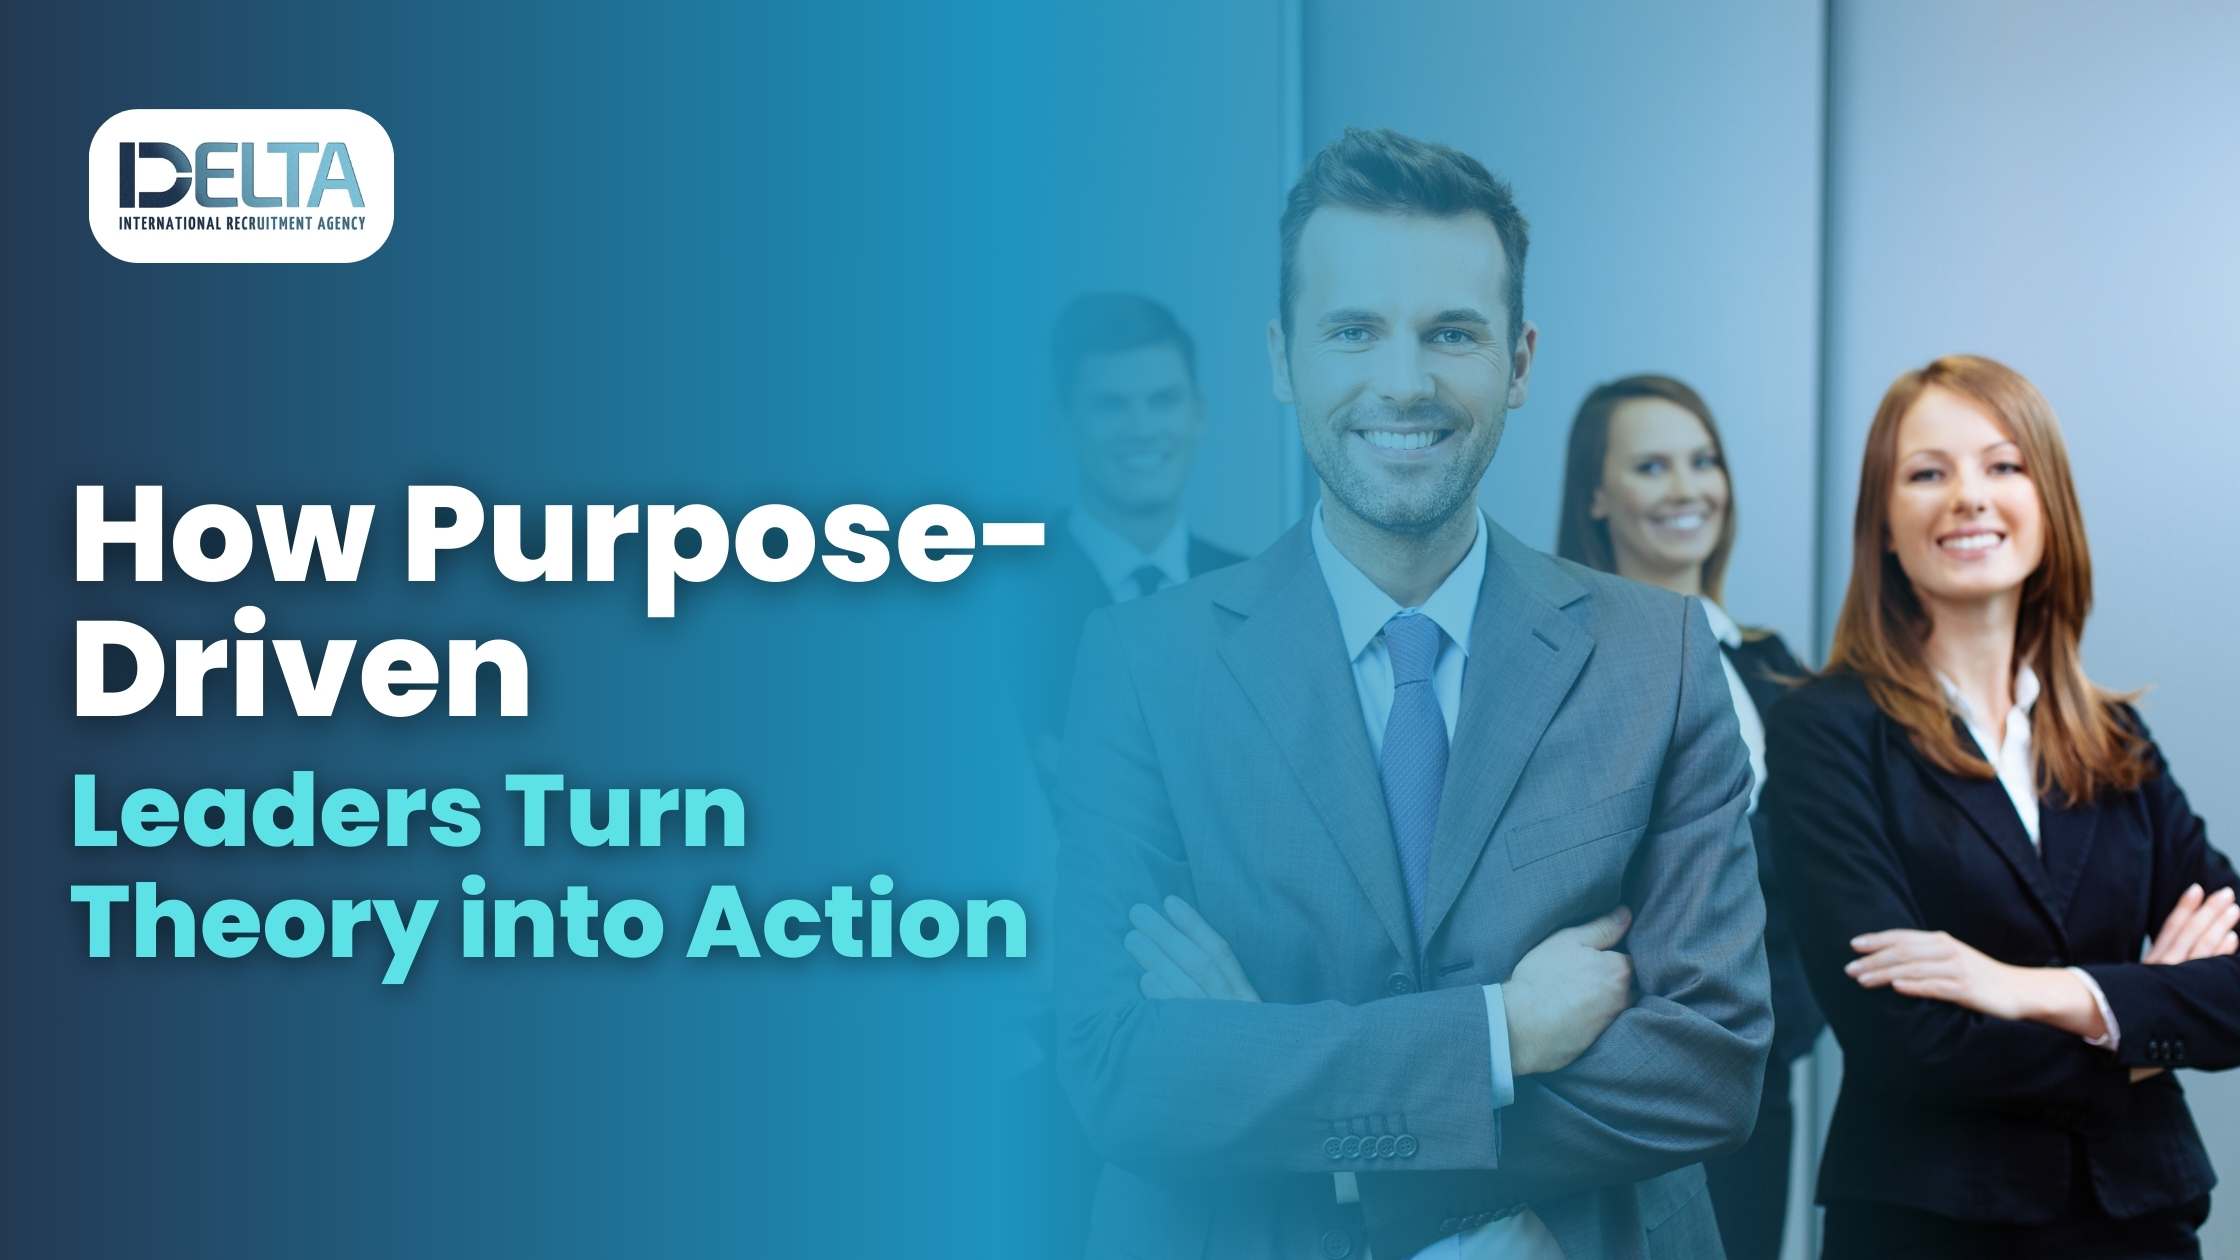 How Purpose-Driven Leaders Turn Theory into Action